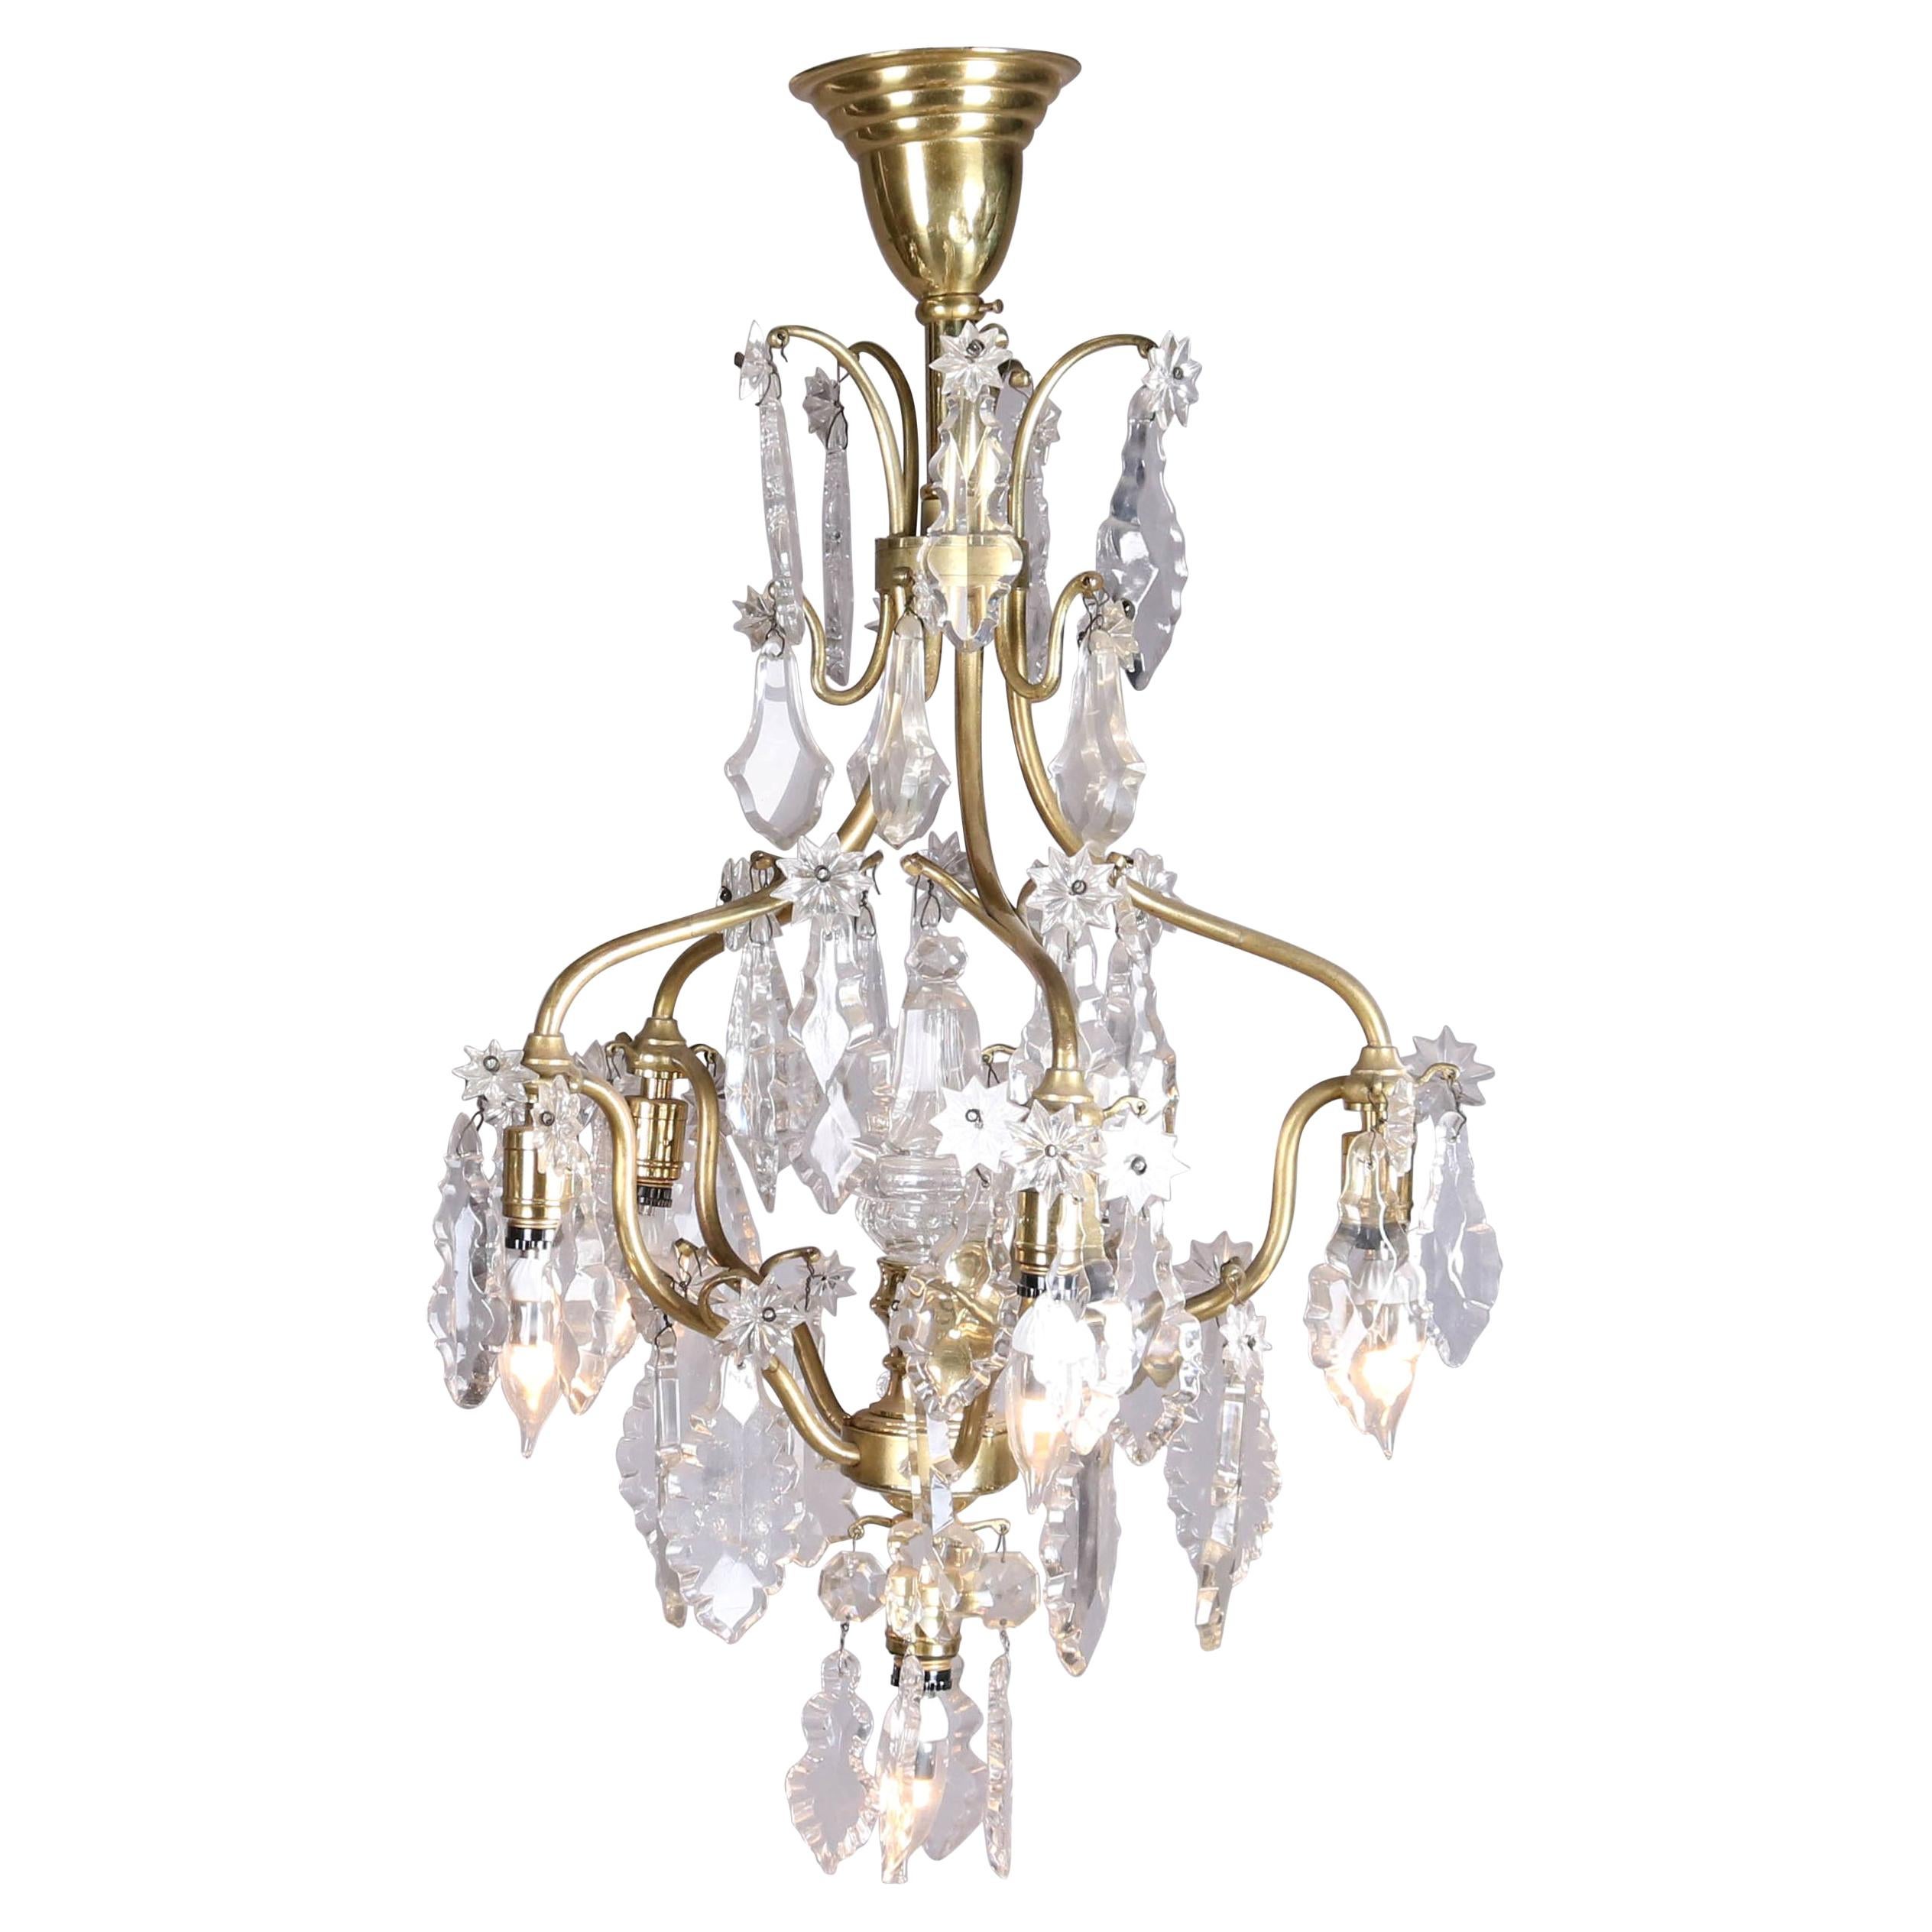 French Five-Light Brass and Cut Crystal Chandelier, Stylized Floral and Foliate